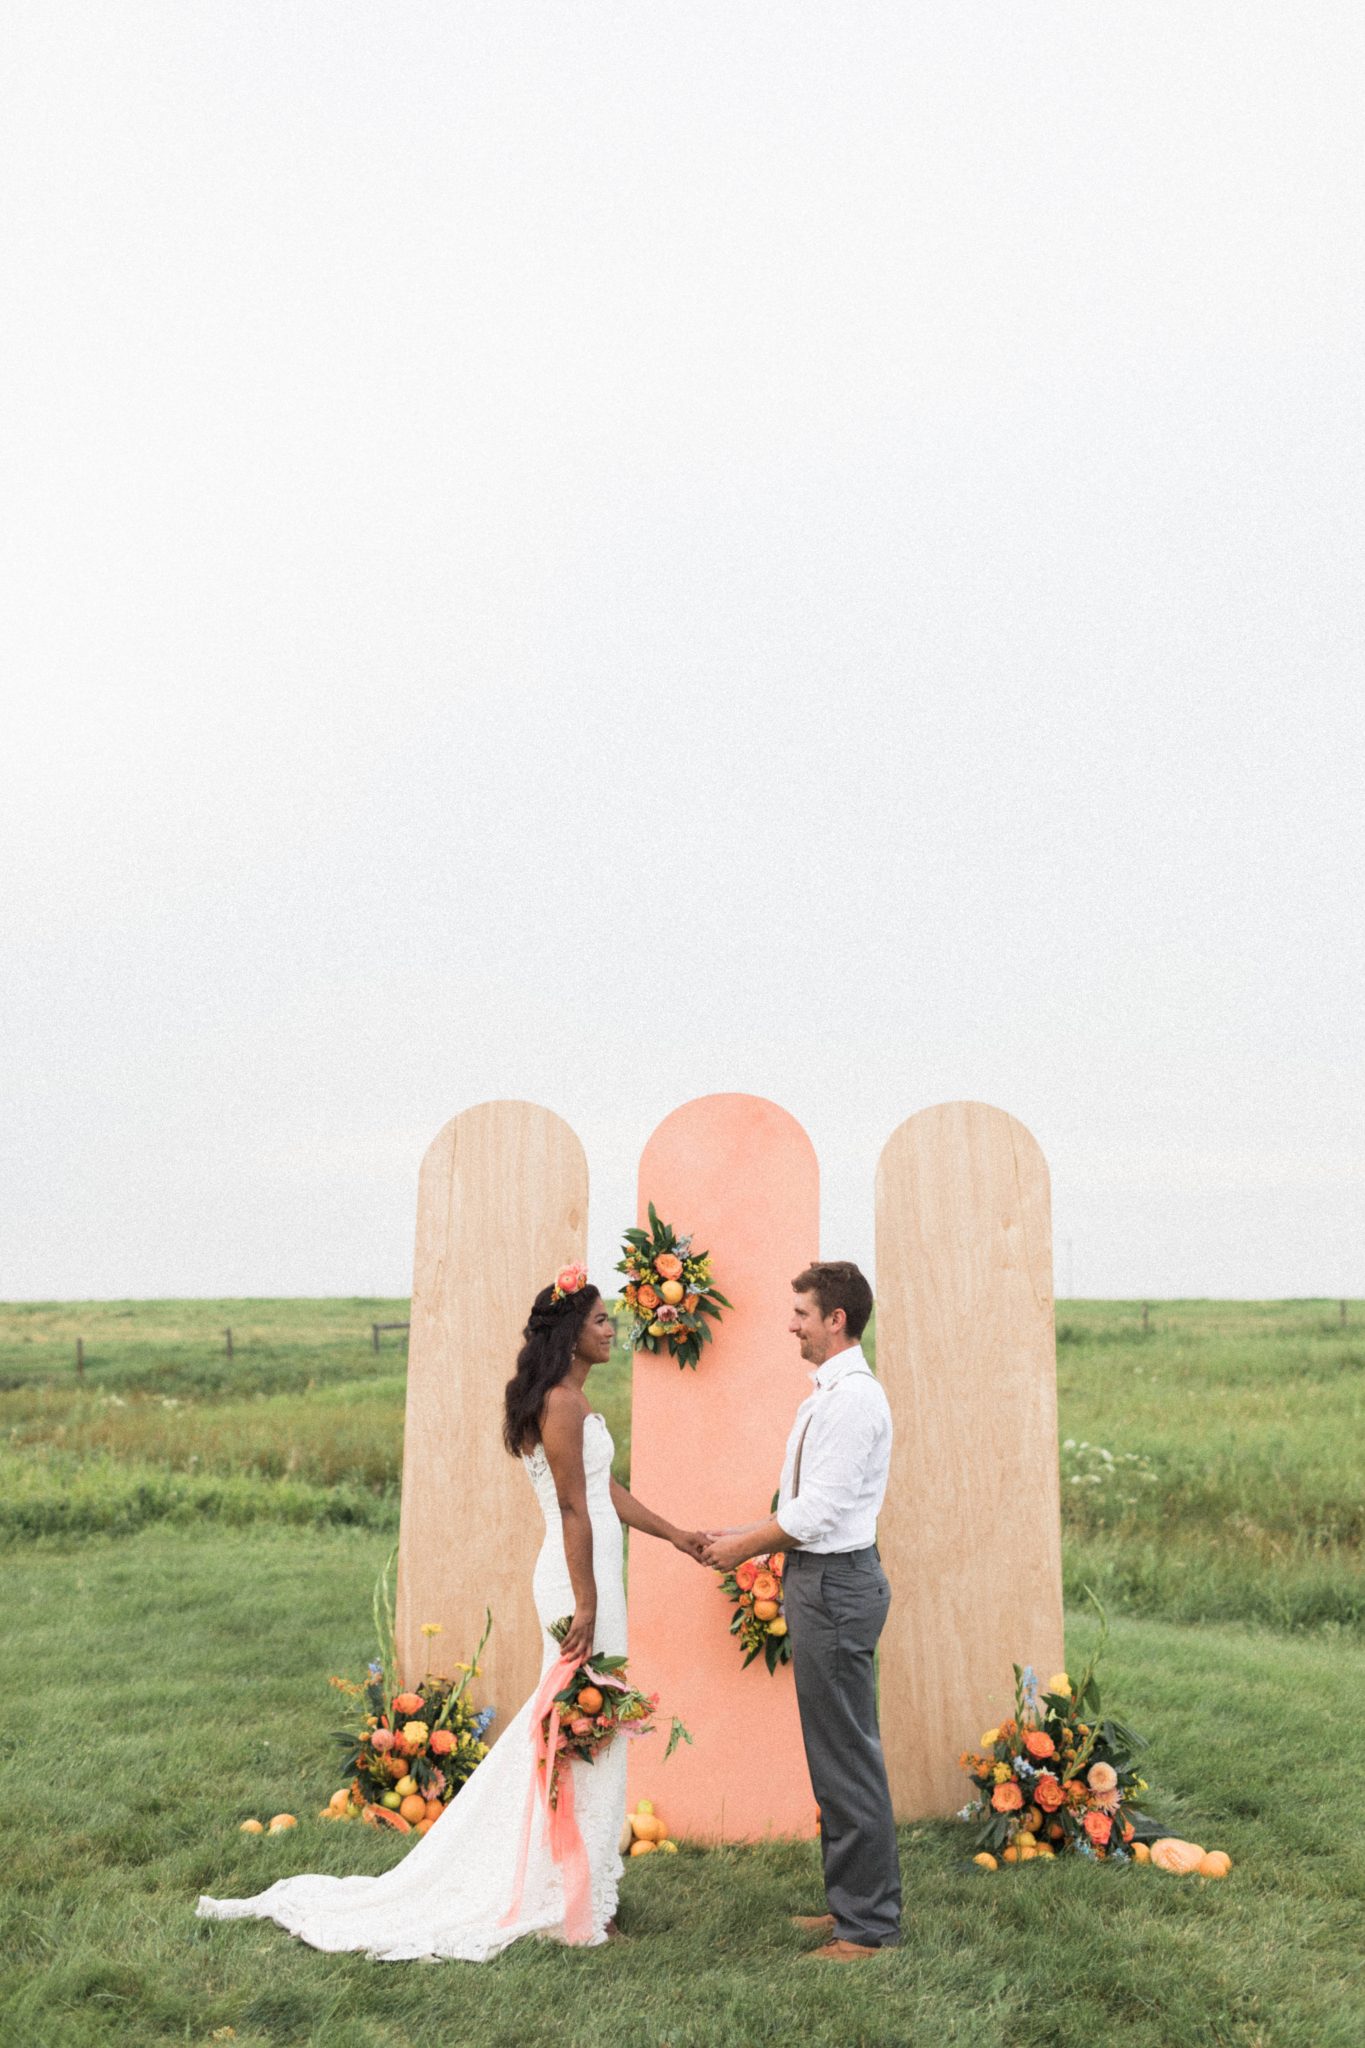 Garden inspired wedding ceremony at The Gathered with ceremony panels